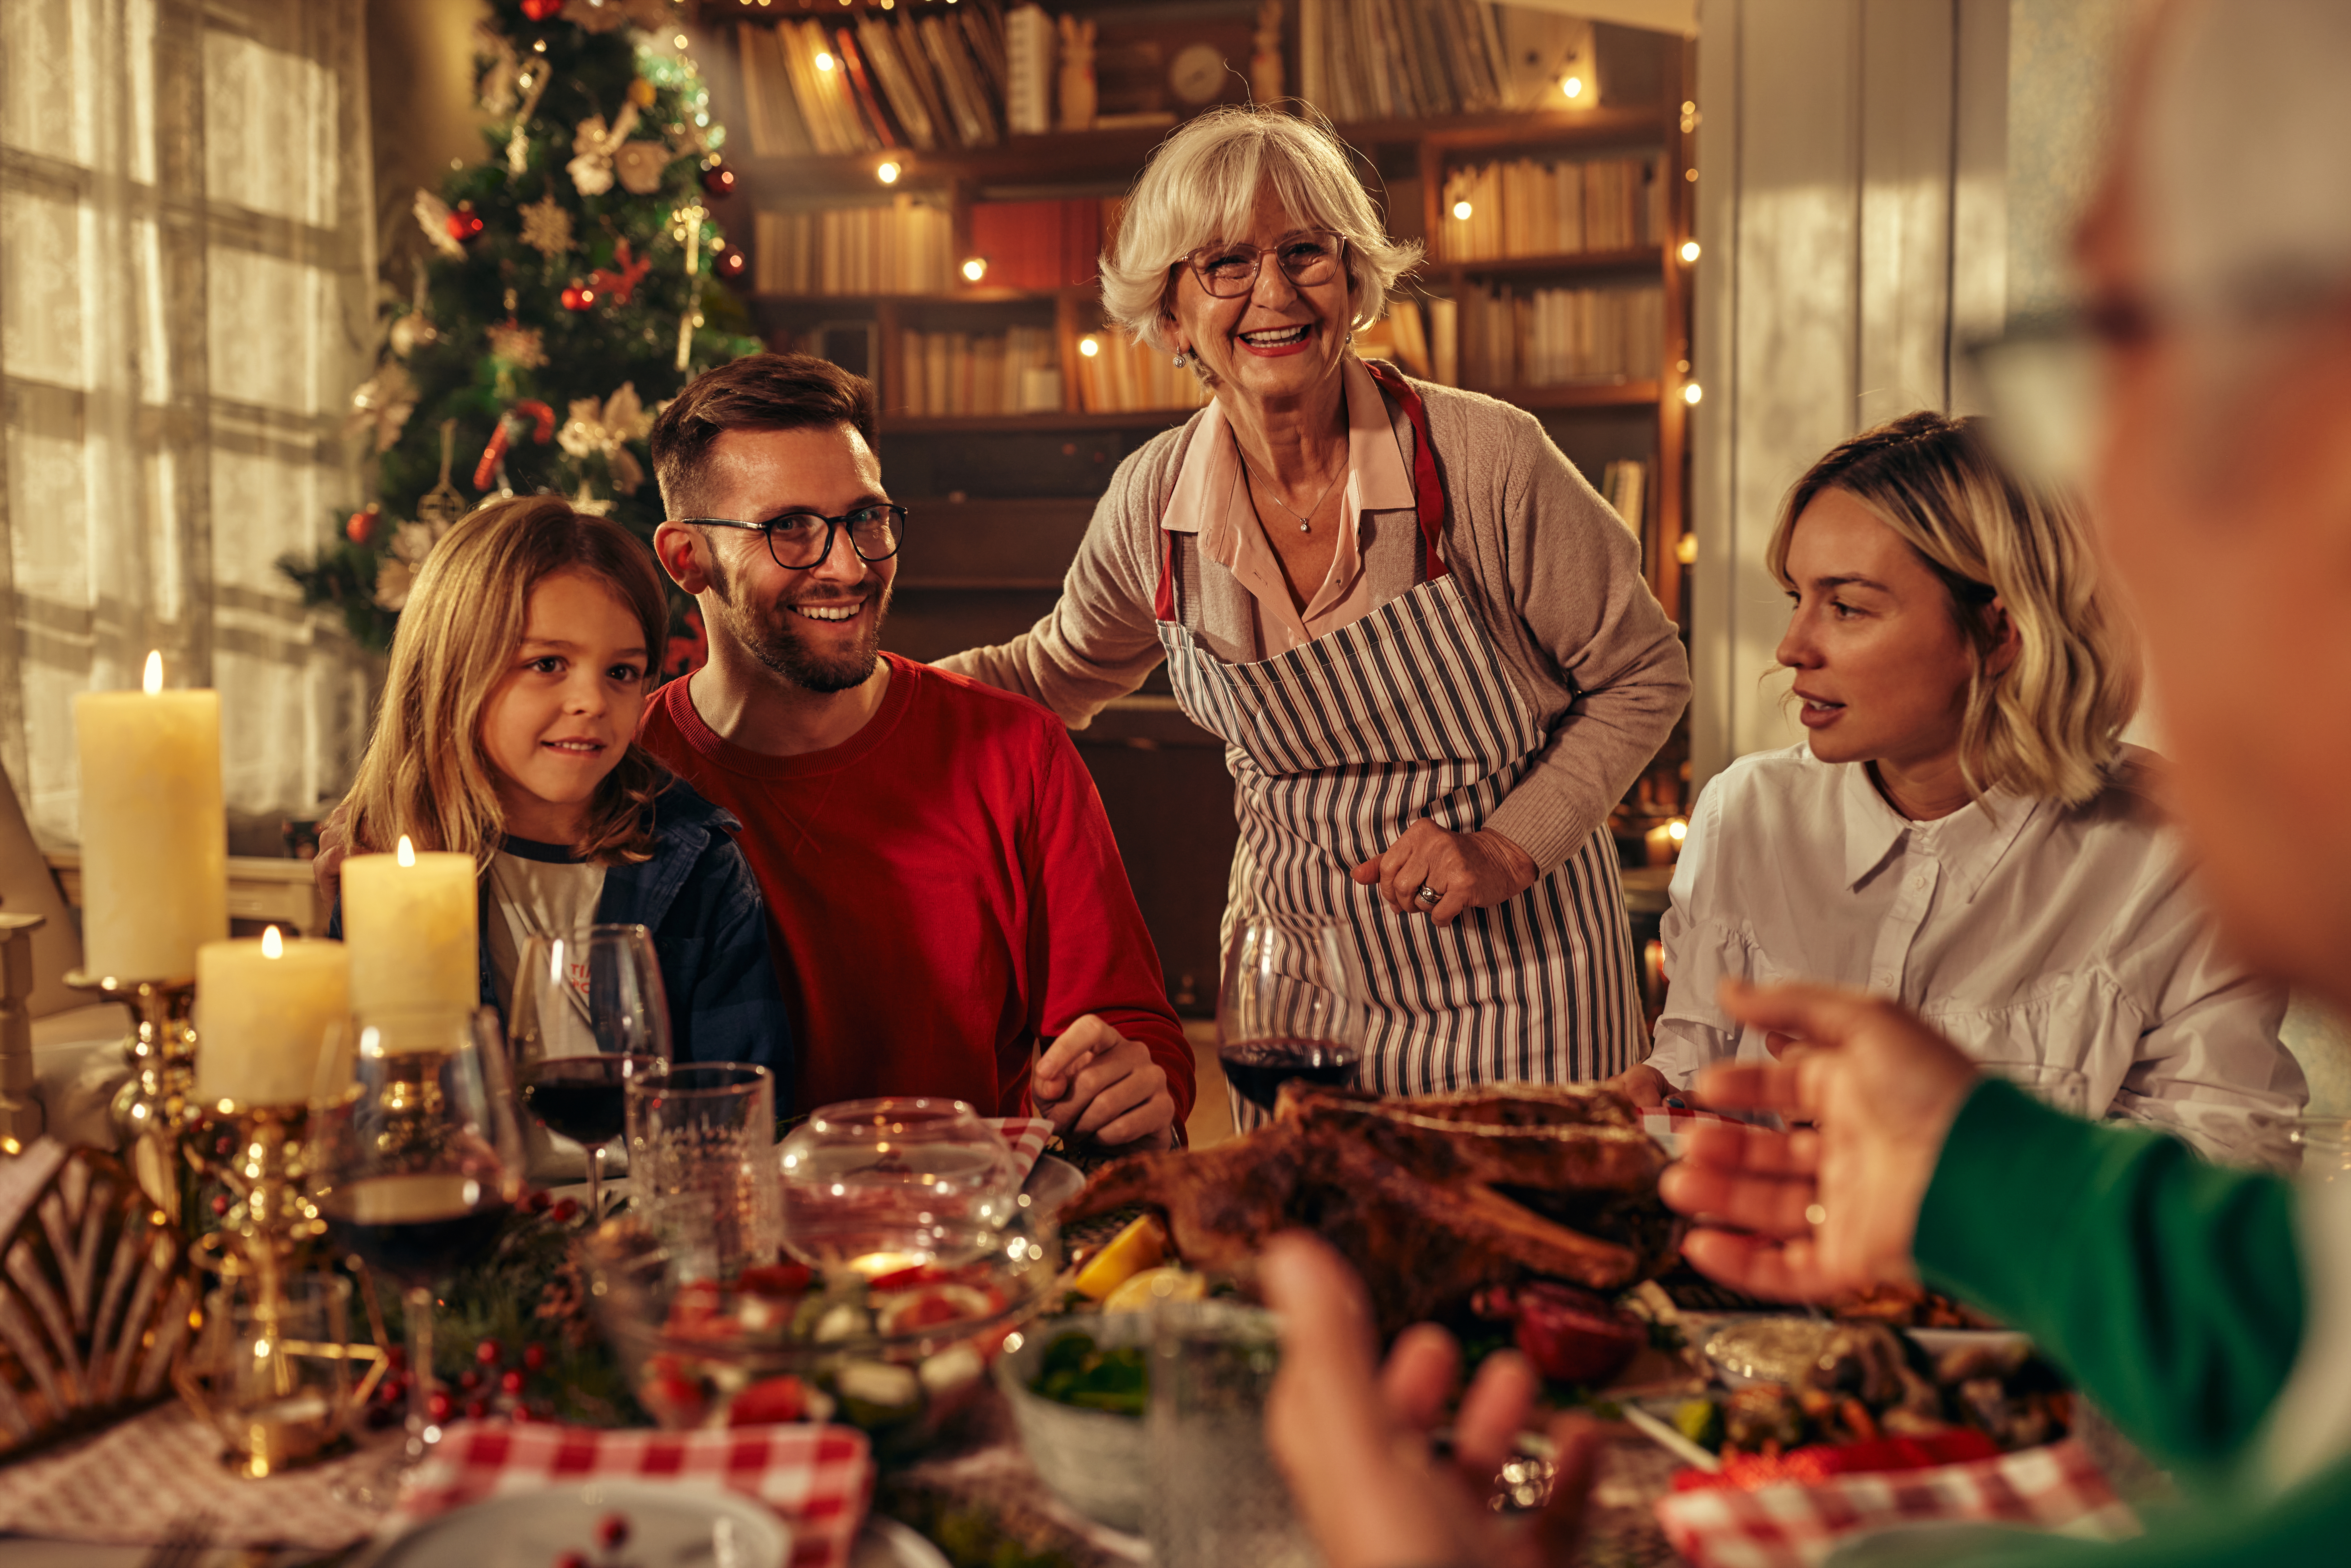 A family gathered for Christmas dinner | Source: Shutterstock